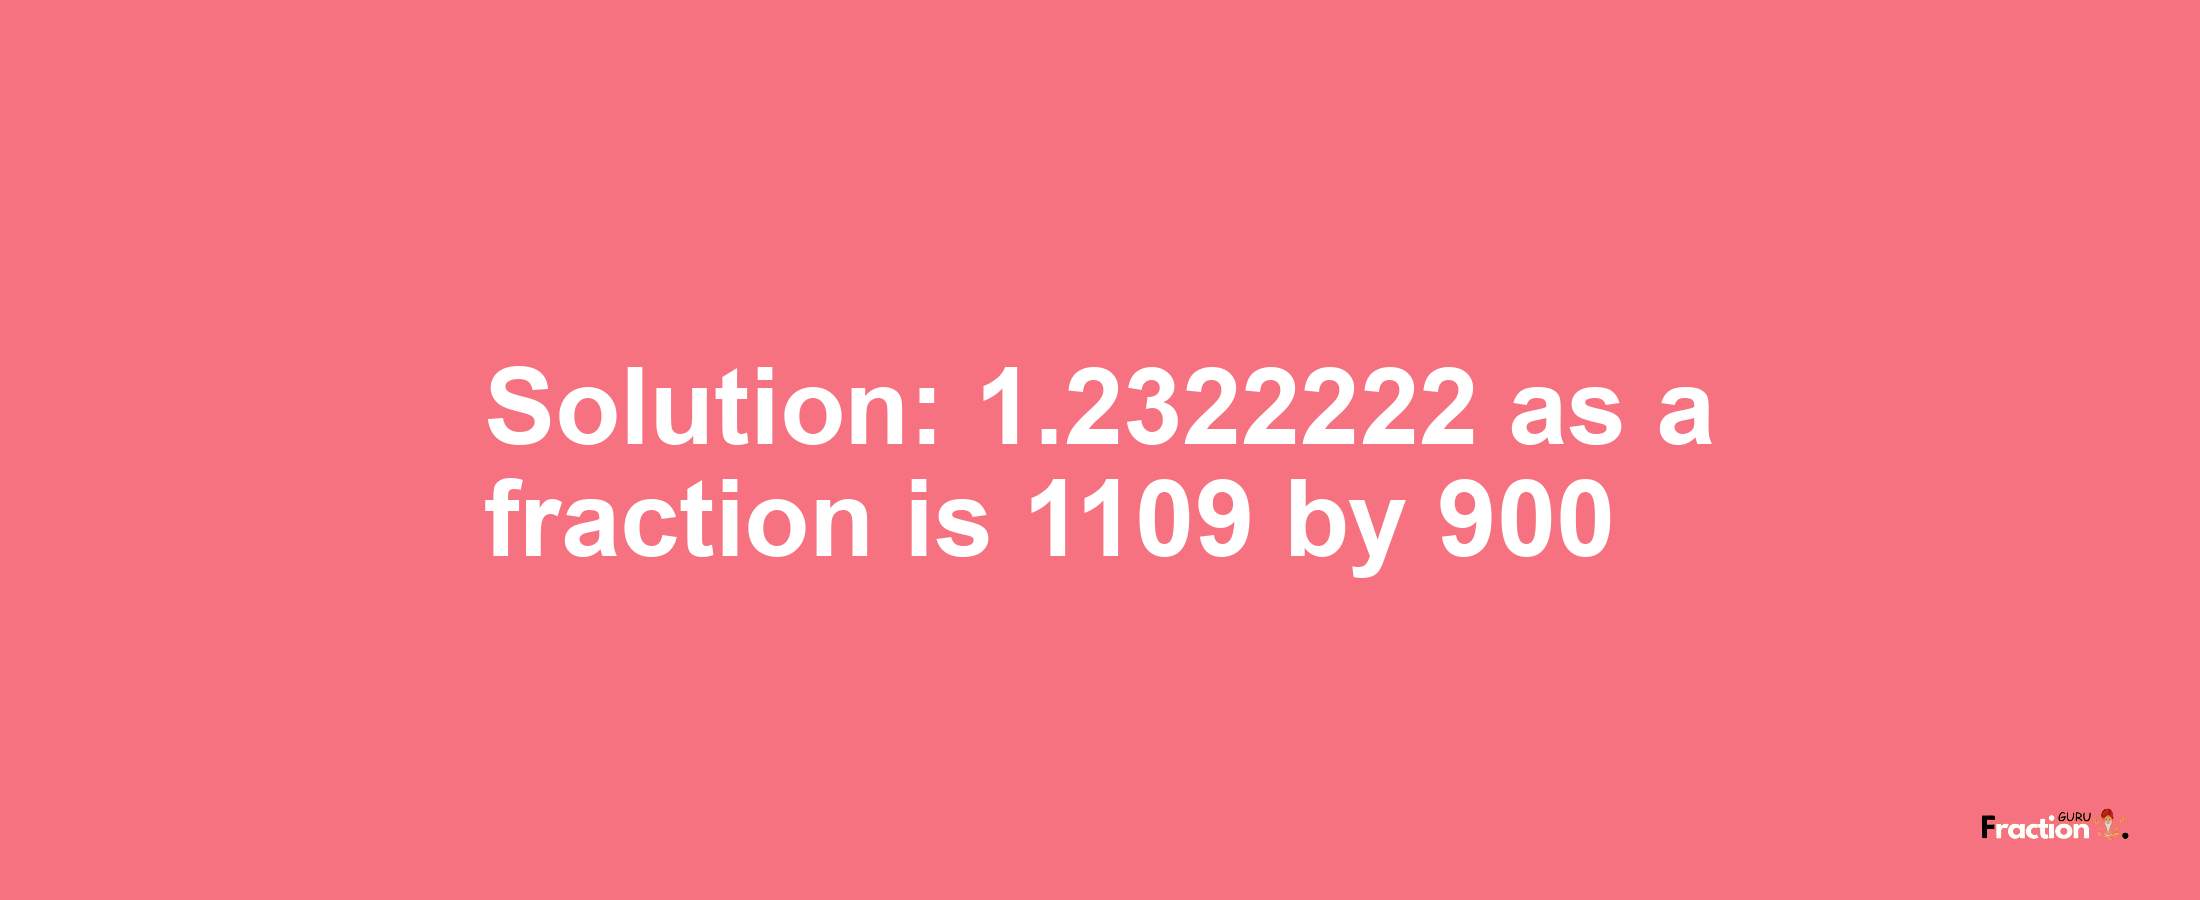 Solution:1.2322222 as a fraction is 1109/900